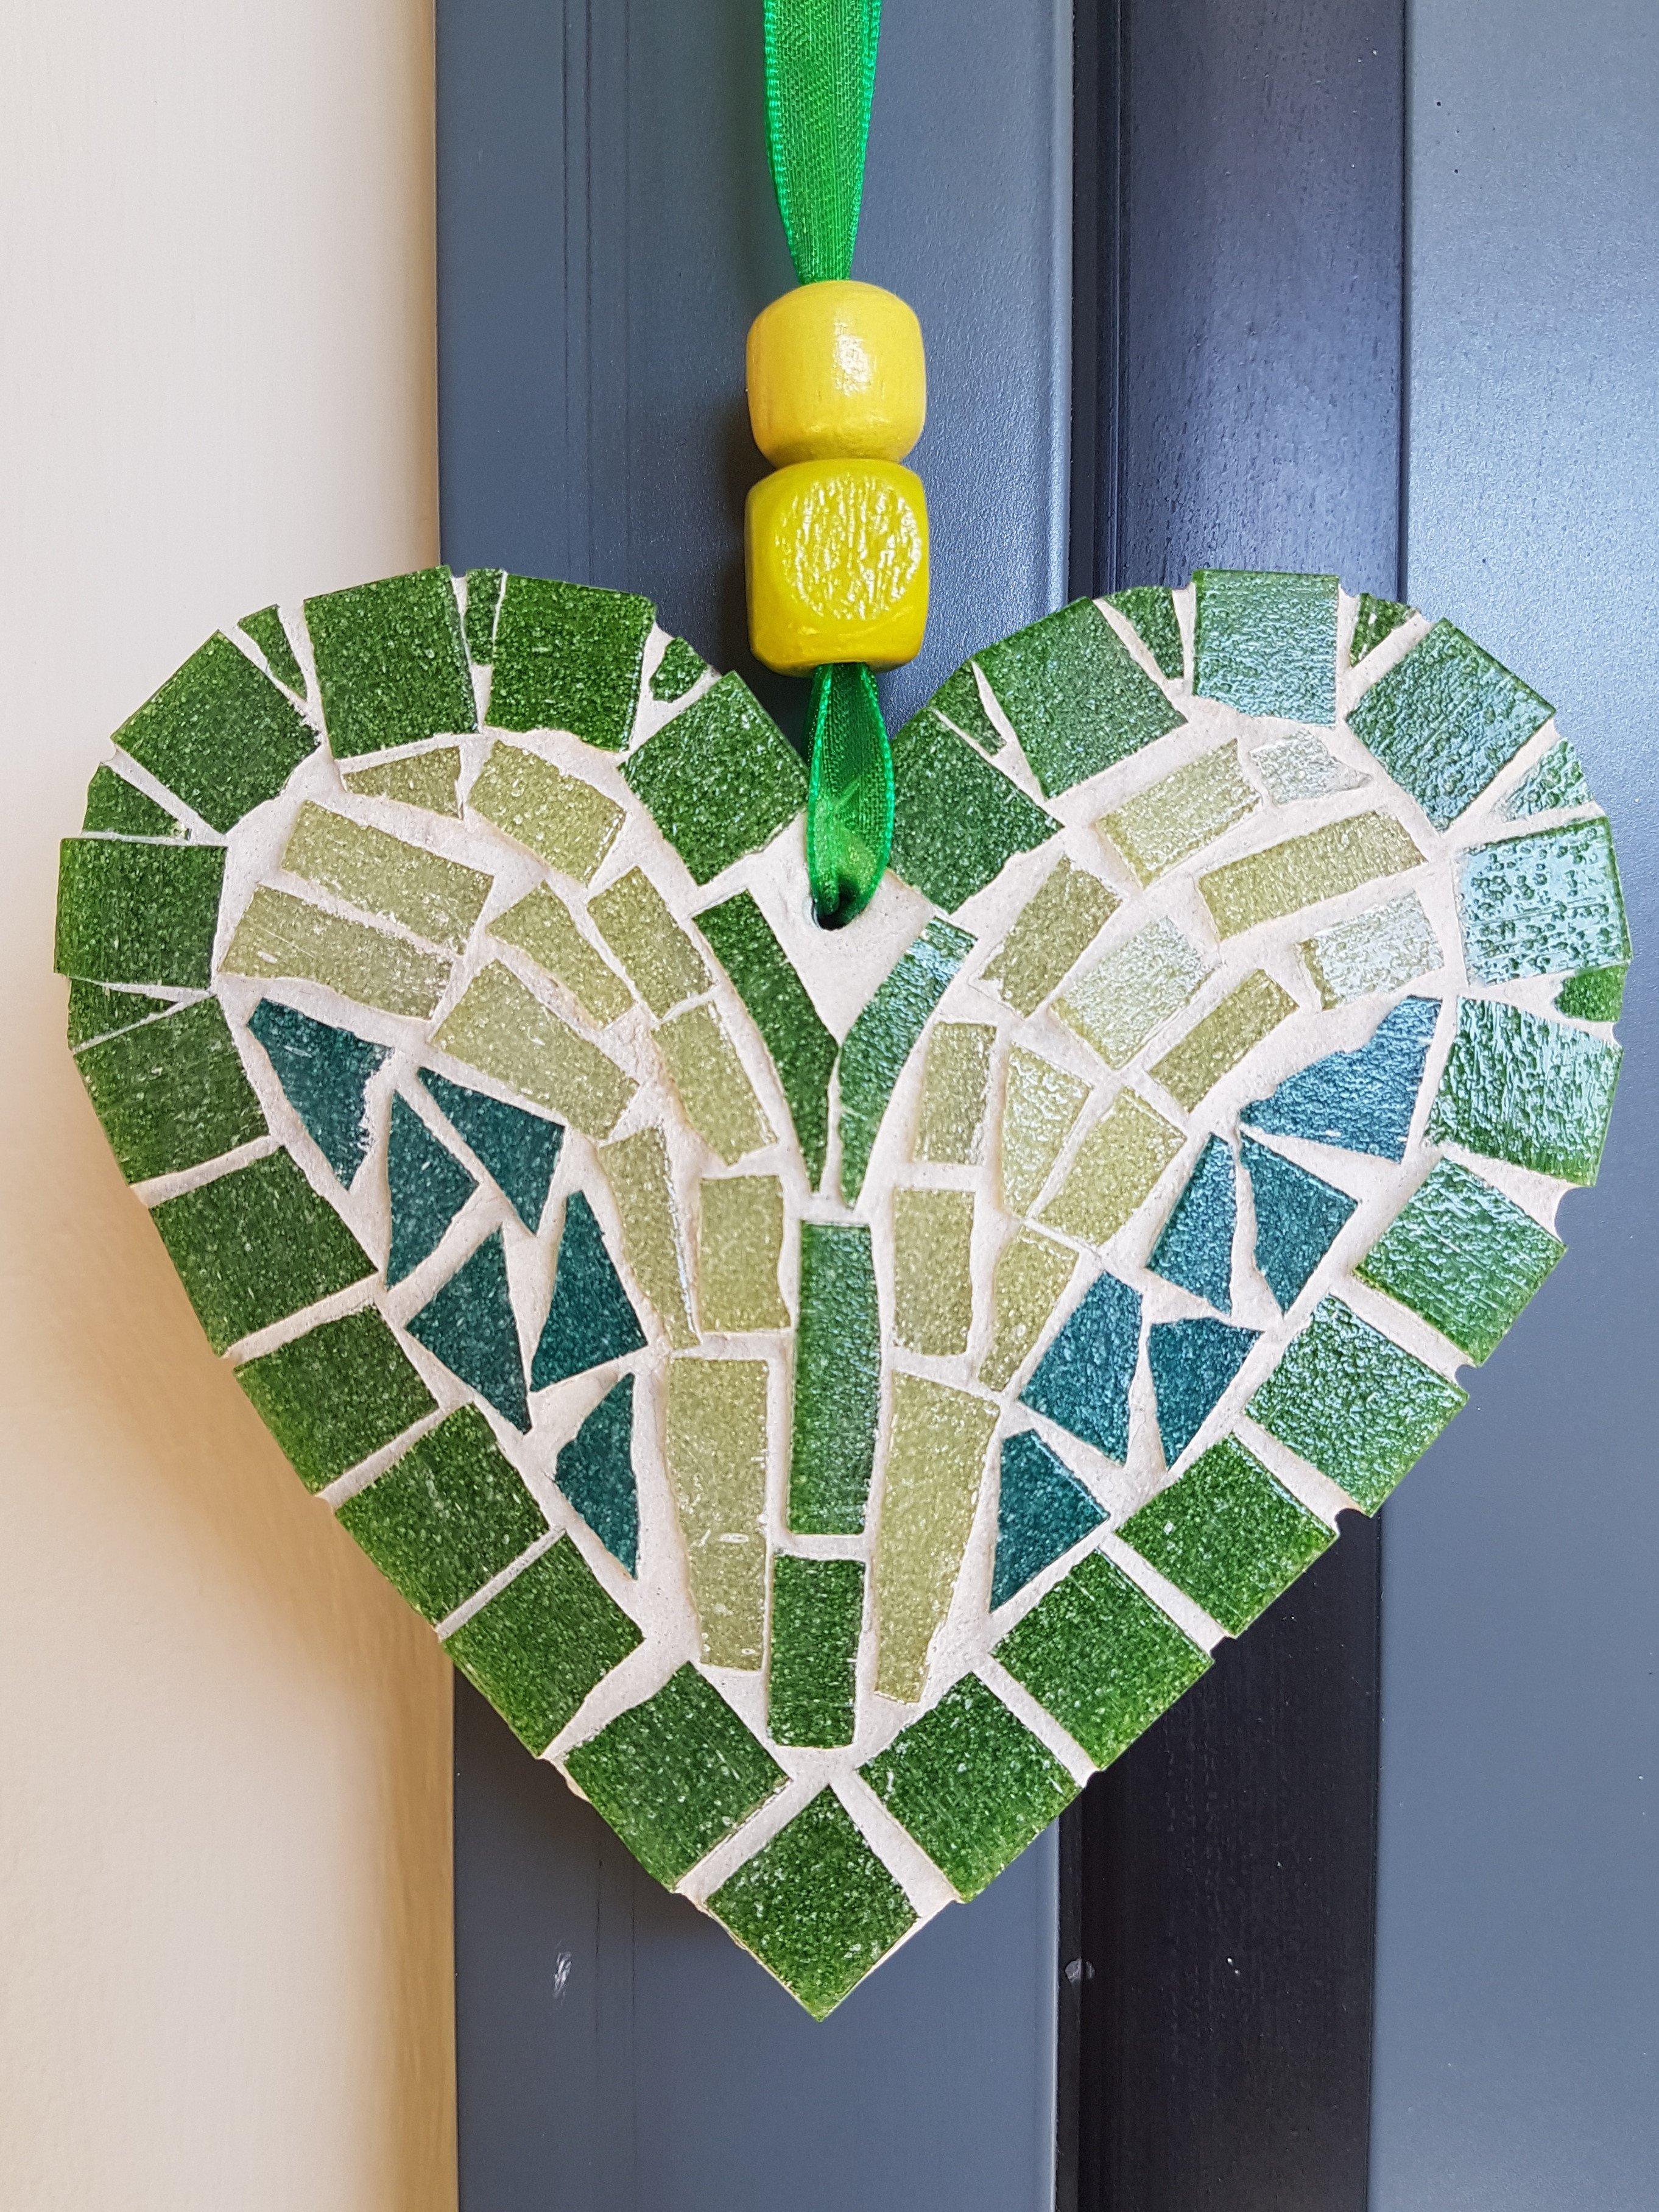 Introduction to mosaic making with Mossy Mosaic